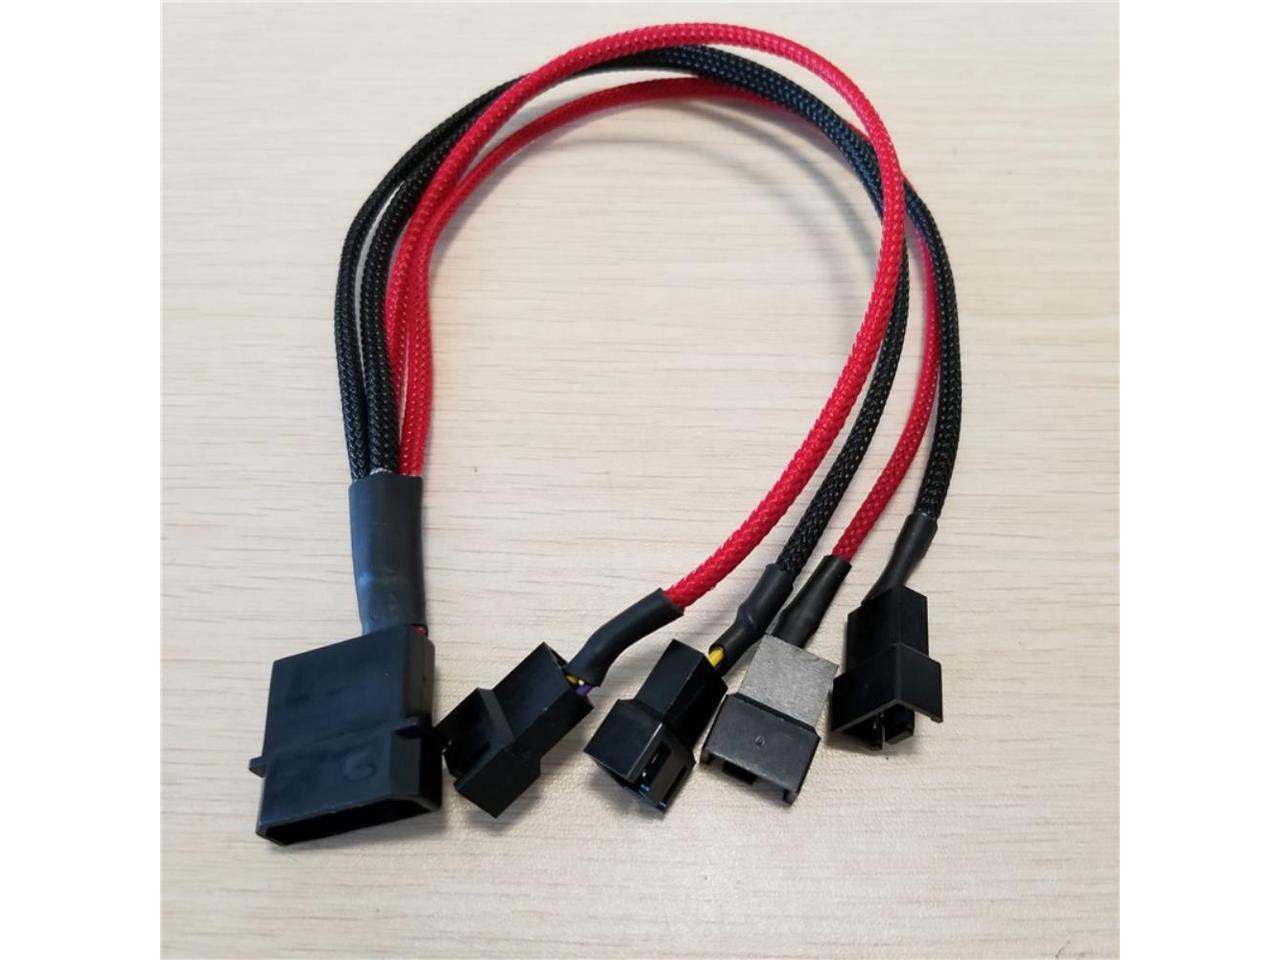 Cable Length: About 30cm 2pin Wire Cooling Fan Splitter Connector Jack Power Supply Cable Cord 22AWG Wire 30cm - ShineBear PC DIY IDE Molex to 4 12V 4Pin Socket